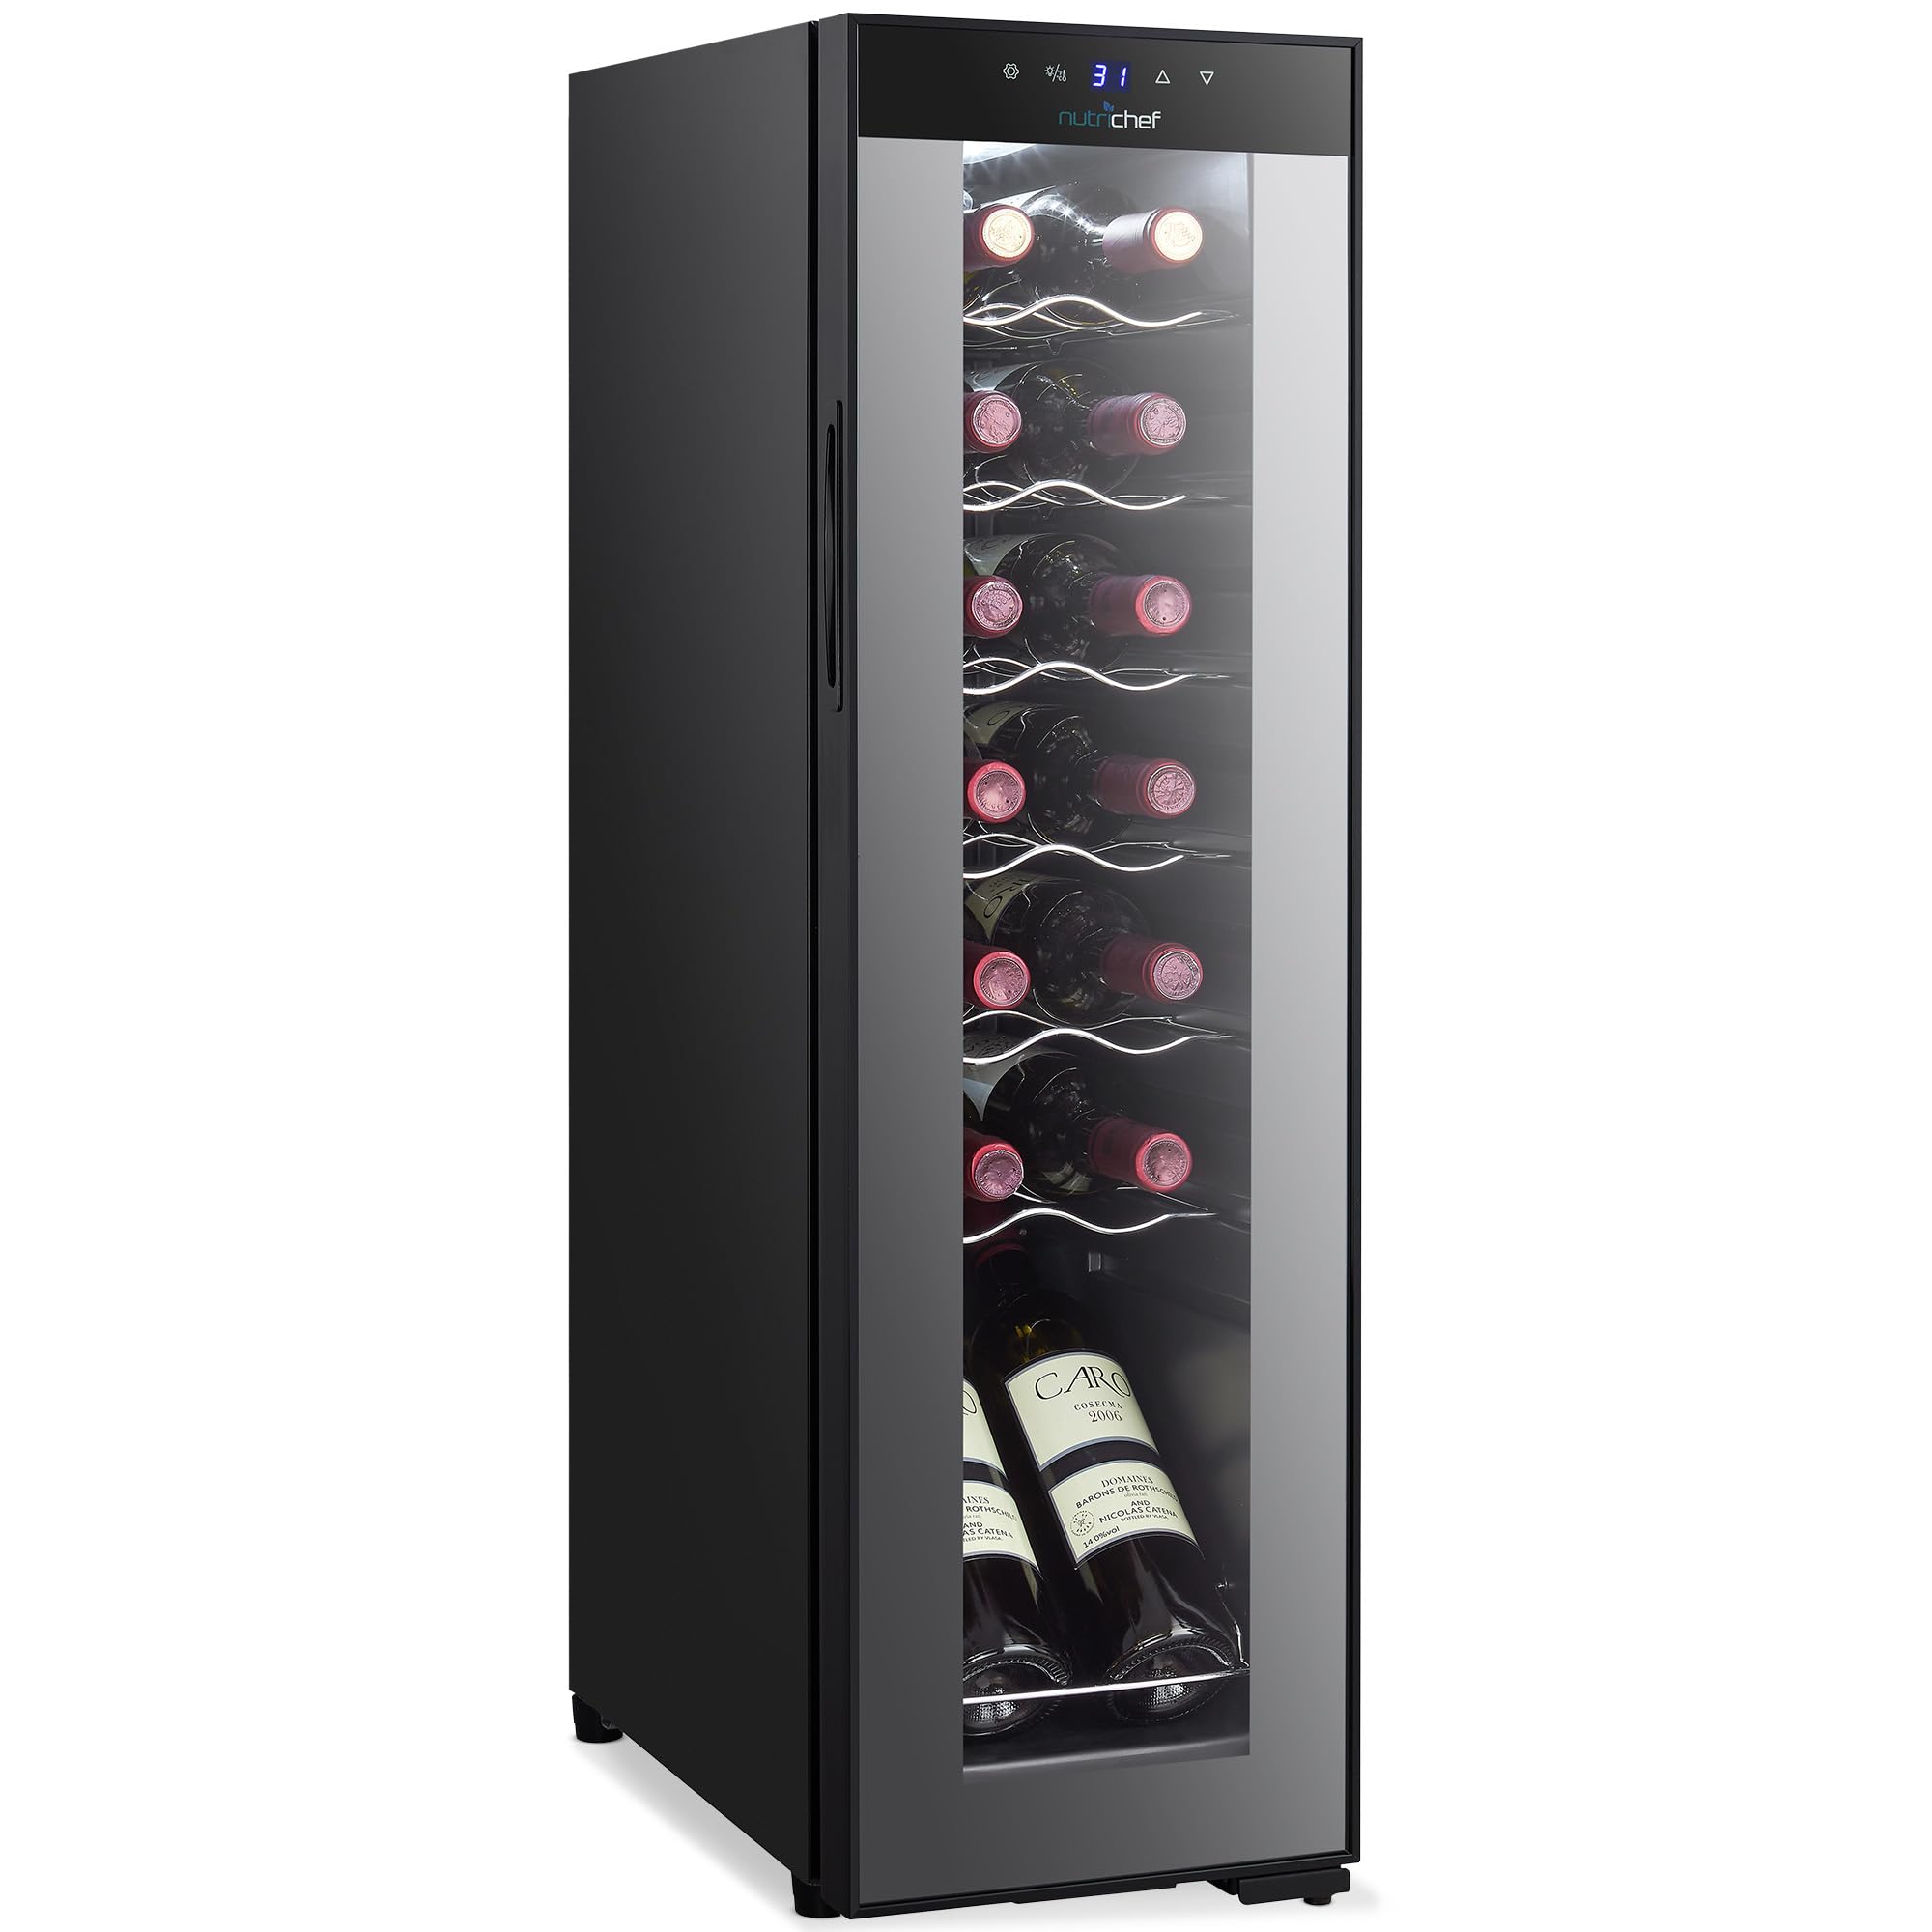 NutriChef PKCWC140 Chilling Refrigerator Cellar-Single-Zone Wine Cooler/Chiller, Digital Touch Button Control with Air Tight Seal, Contains Placement for Standing (14 Bottle Storage Capacity), Black